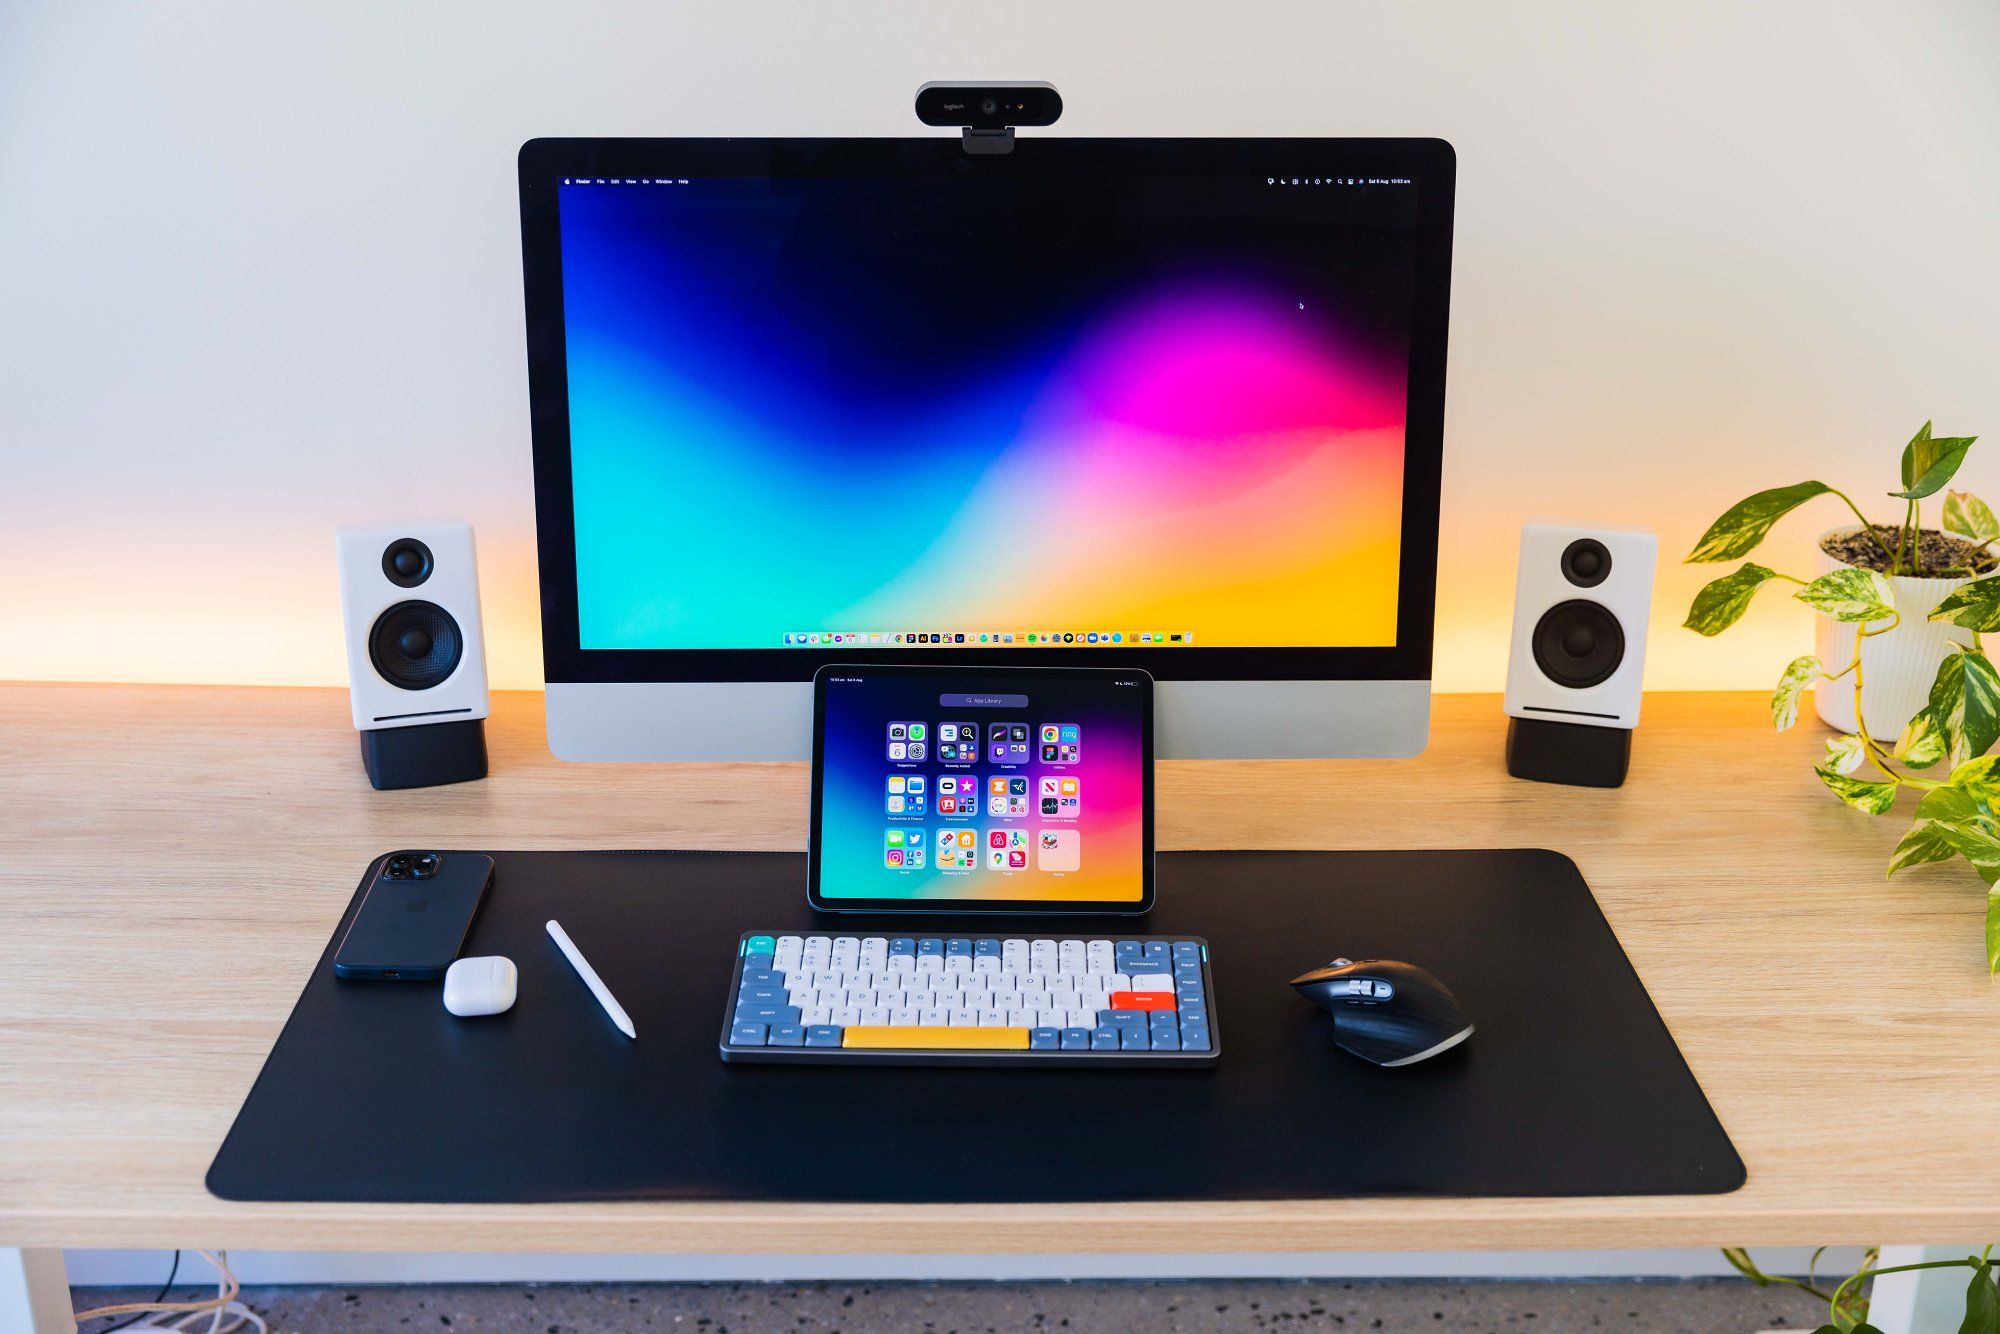 An iMac, an iPad with an Apple Pencil, AirPods, an iPhone, a NuPhy Air75 keyboard, a Logitech MX Master 3 mouse, Audioengine A2+ speakers, and a potted houseplant on the desk